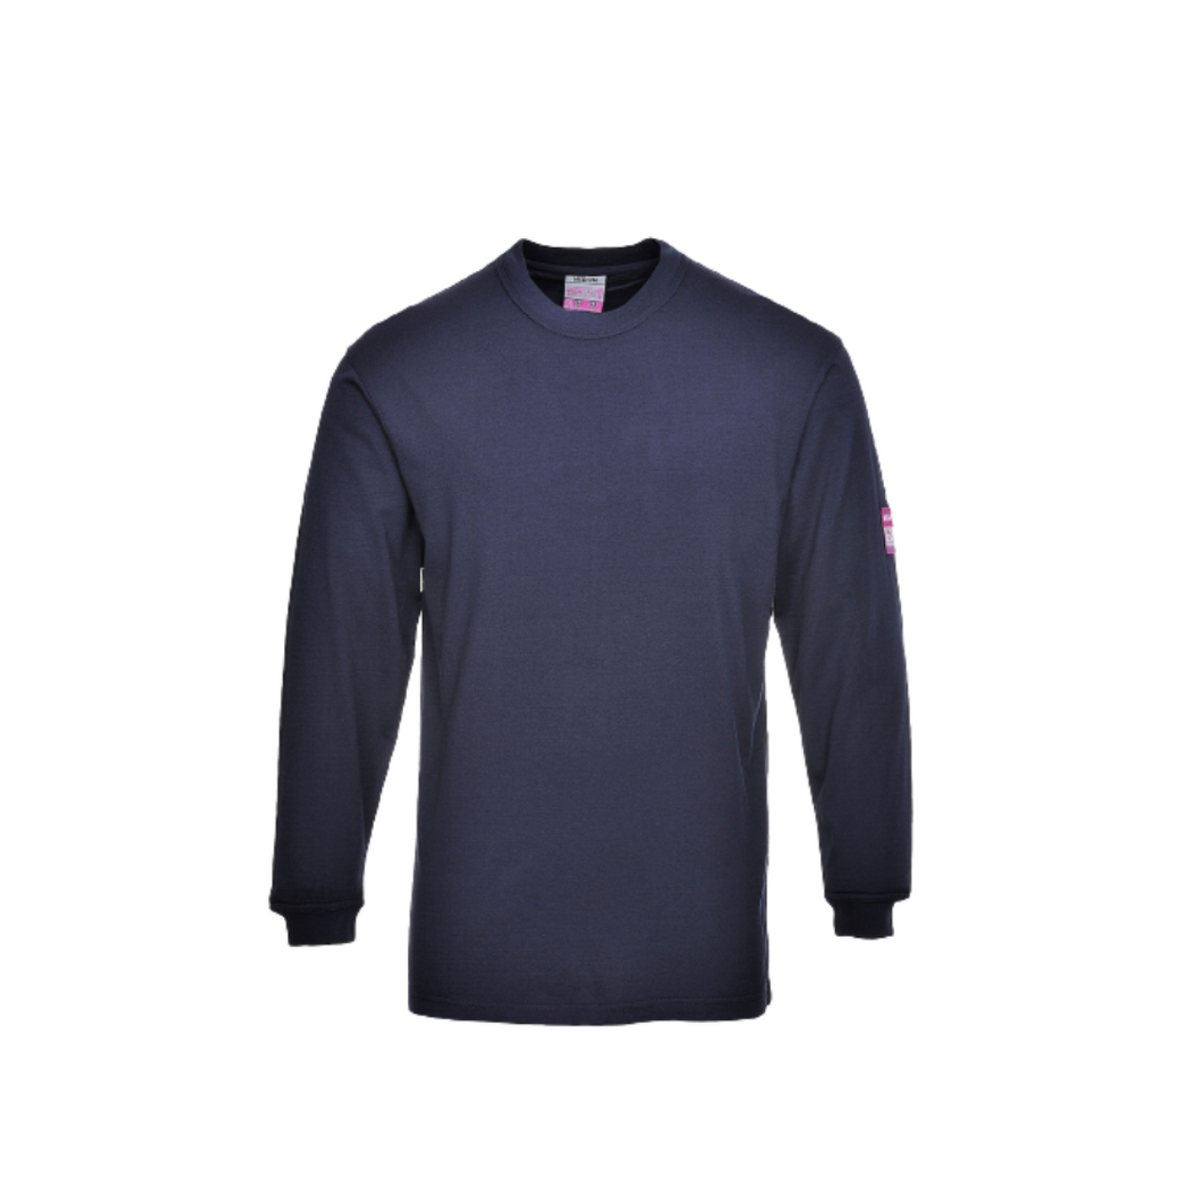 Portwest Flame Resistant Anti-Static Long Sleeve T-Shirt Navy Breathable FR11-Collins Clothing Co